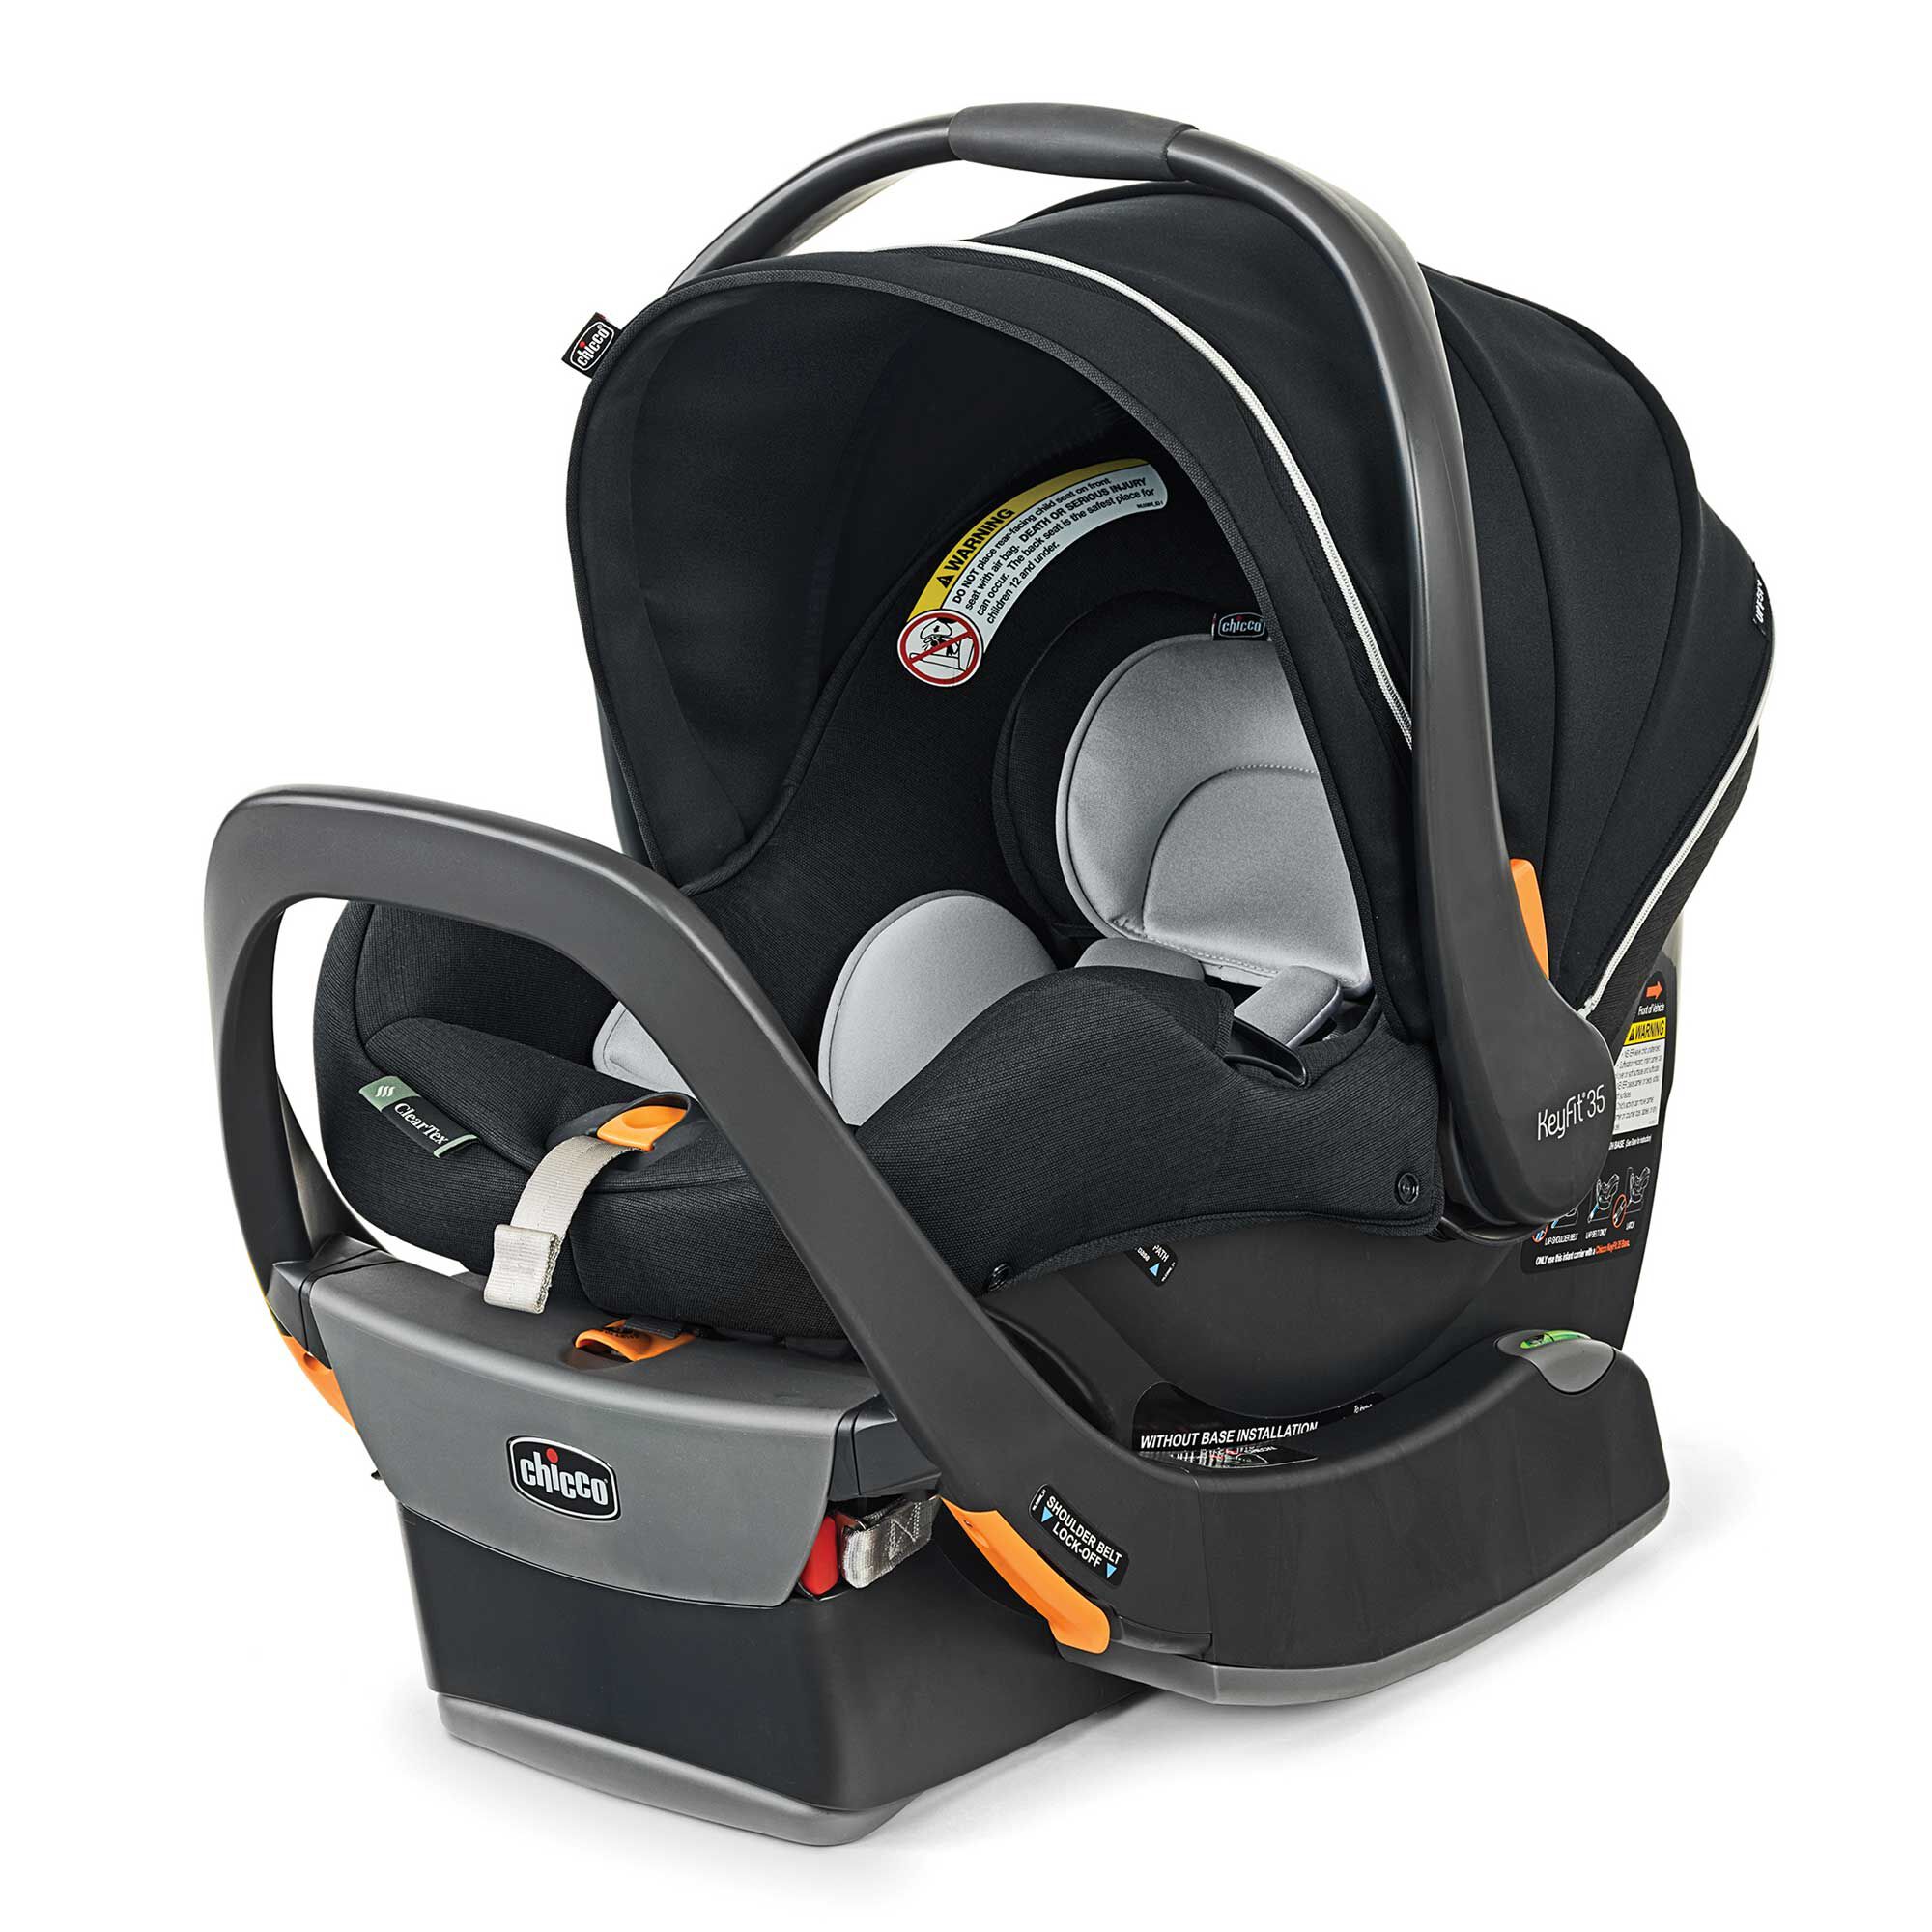 Chicco Baby Products | Car Seats, Strollers, Highchairs & More